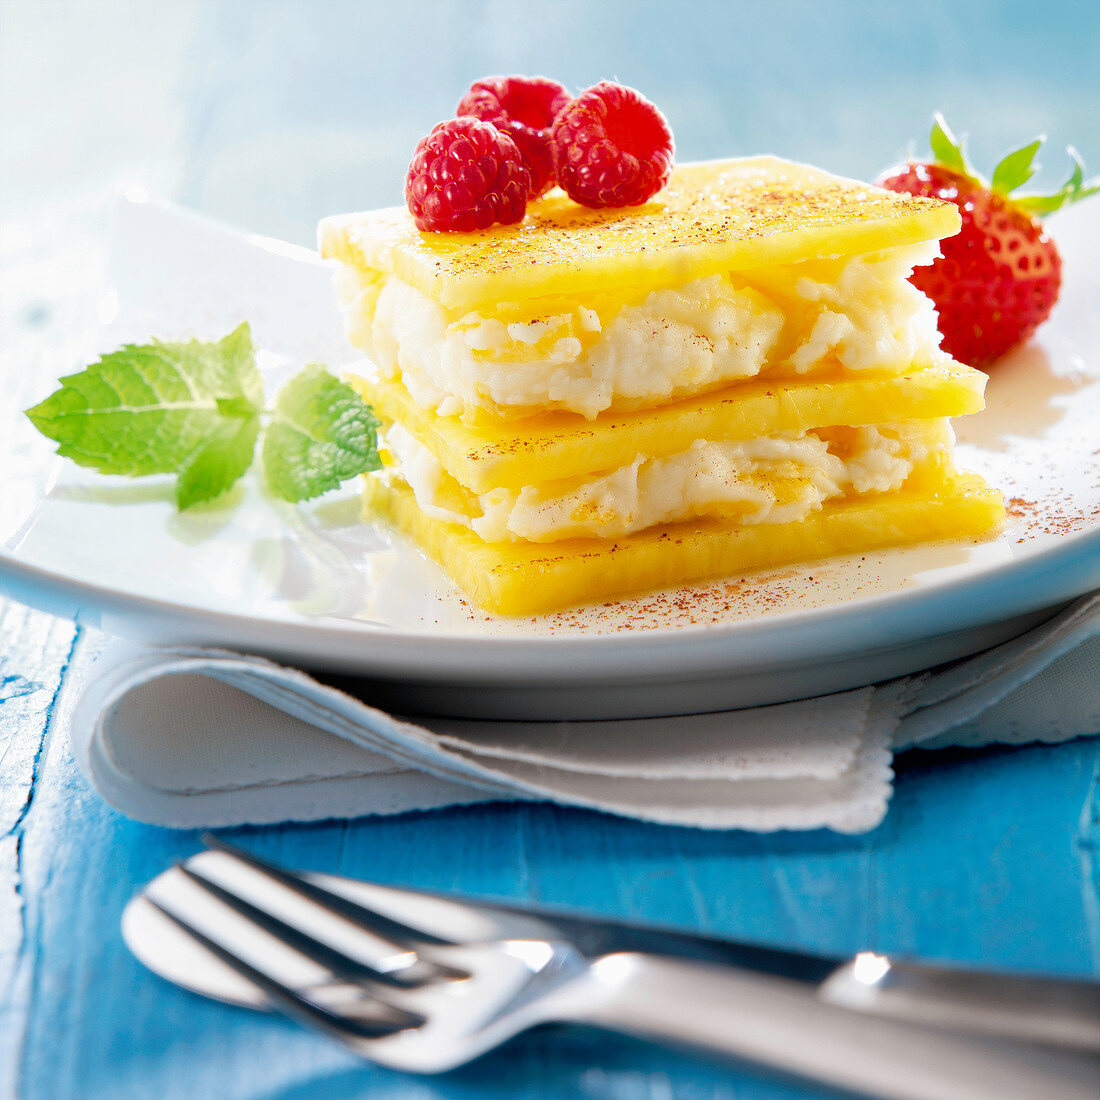 Pineapple mille-feuille with fresh cheese and raspberry